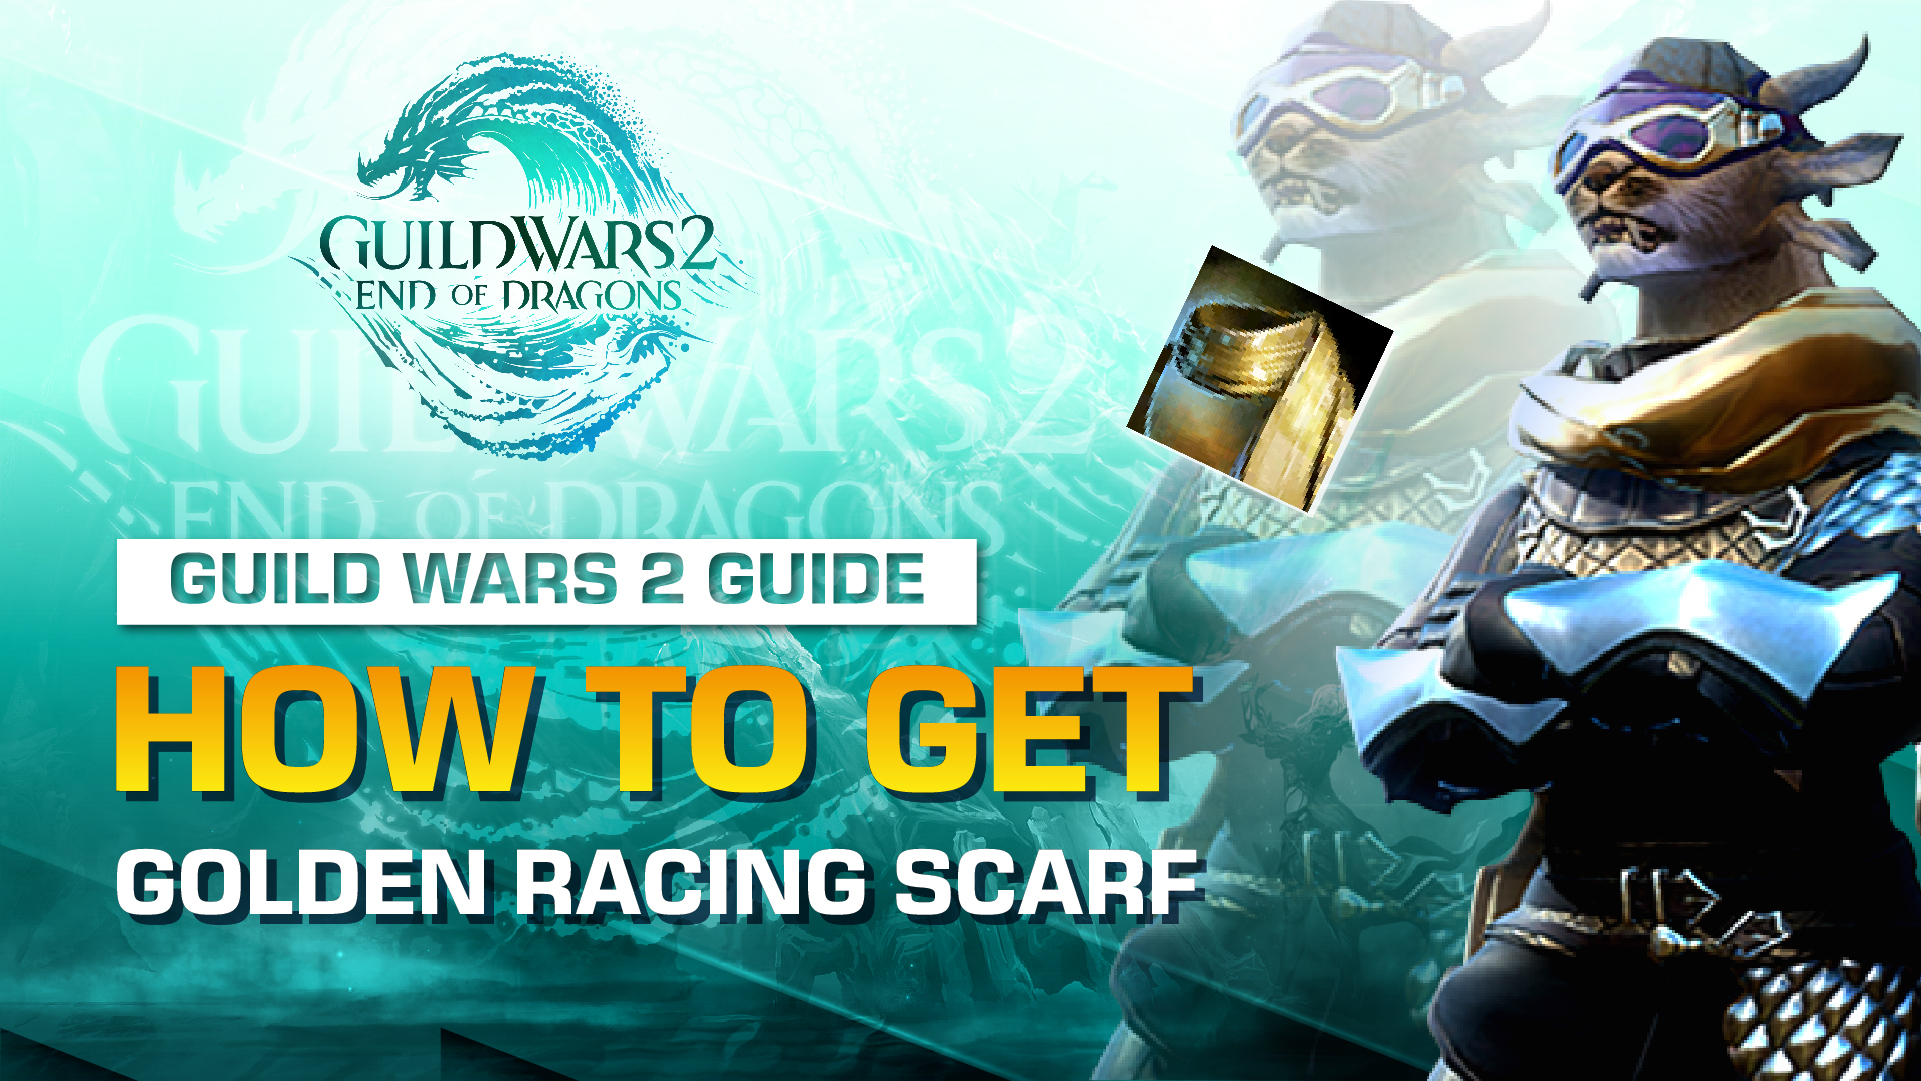 YT_THUMBNAIL_HOW_TO_GET_GOLDEN_RACING_SCARF.jpg